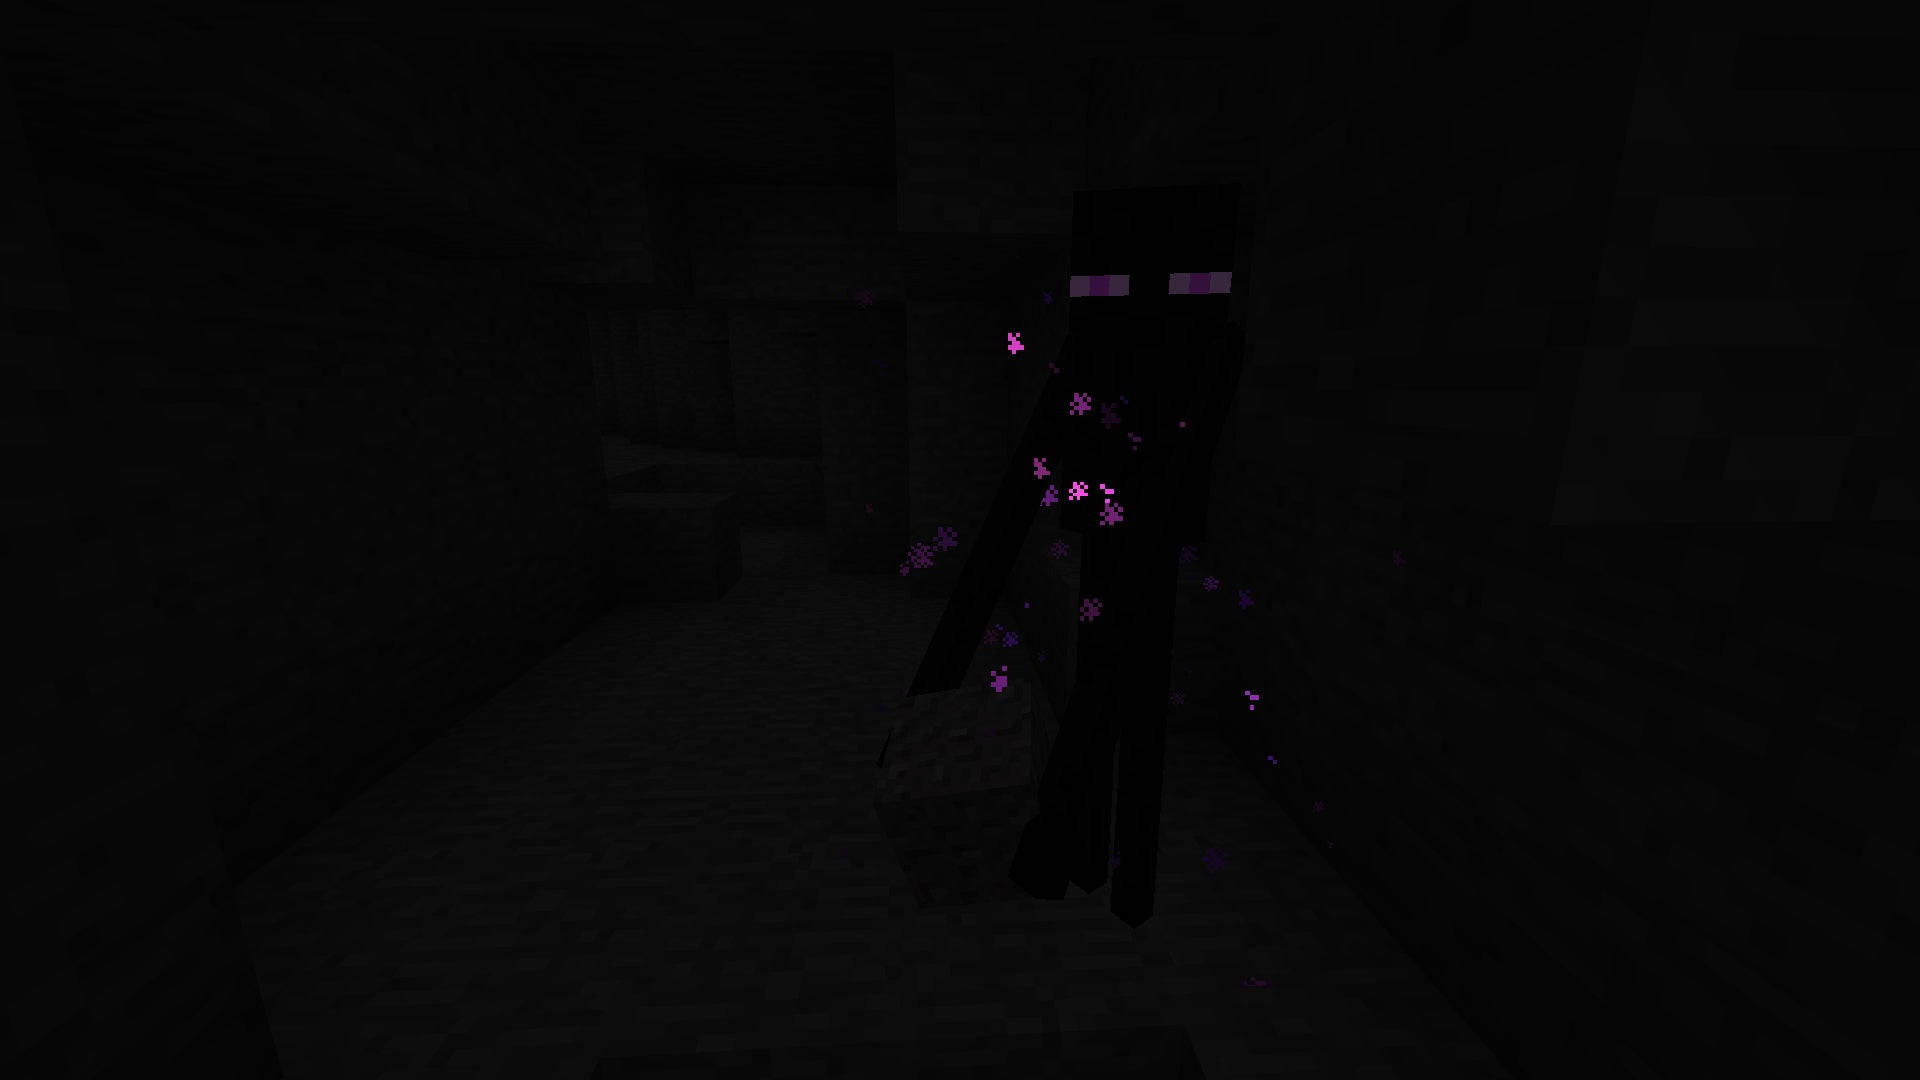 An Enderman, A Unique Creature From The Popular Video Game Minecraft, Captured In A Stunning, High Resolution Image.